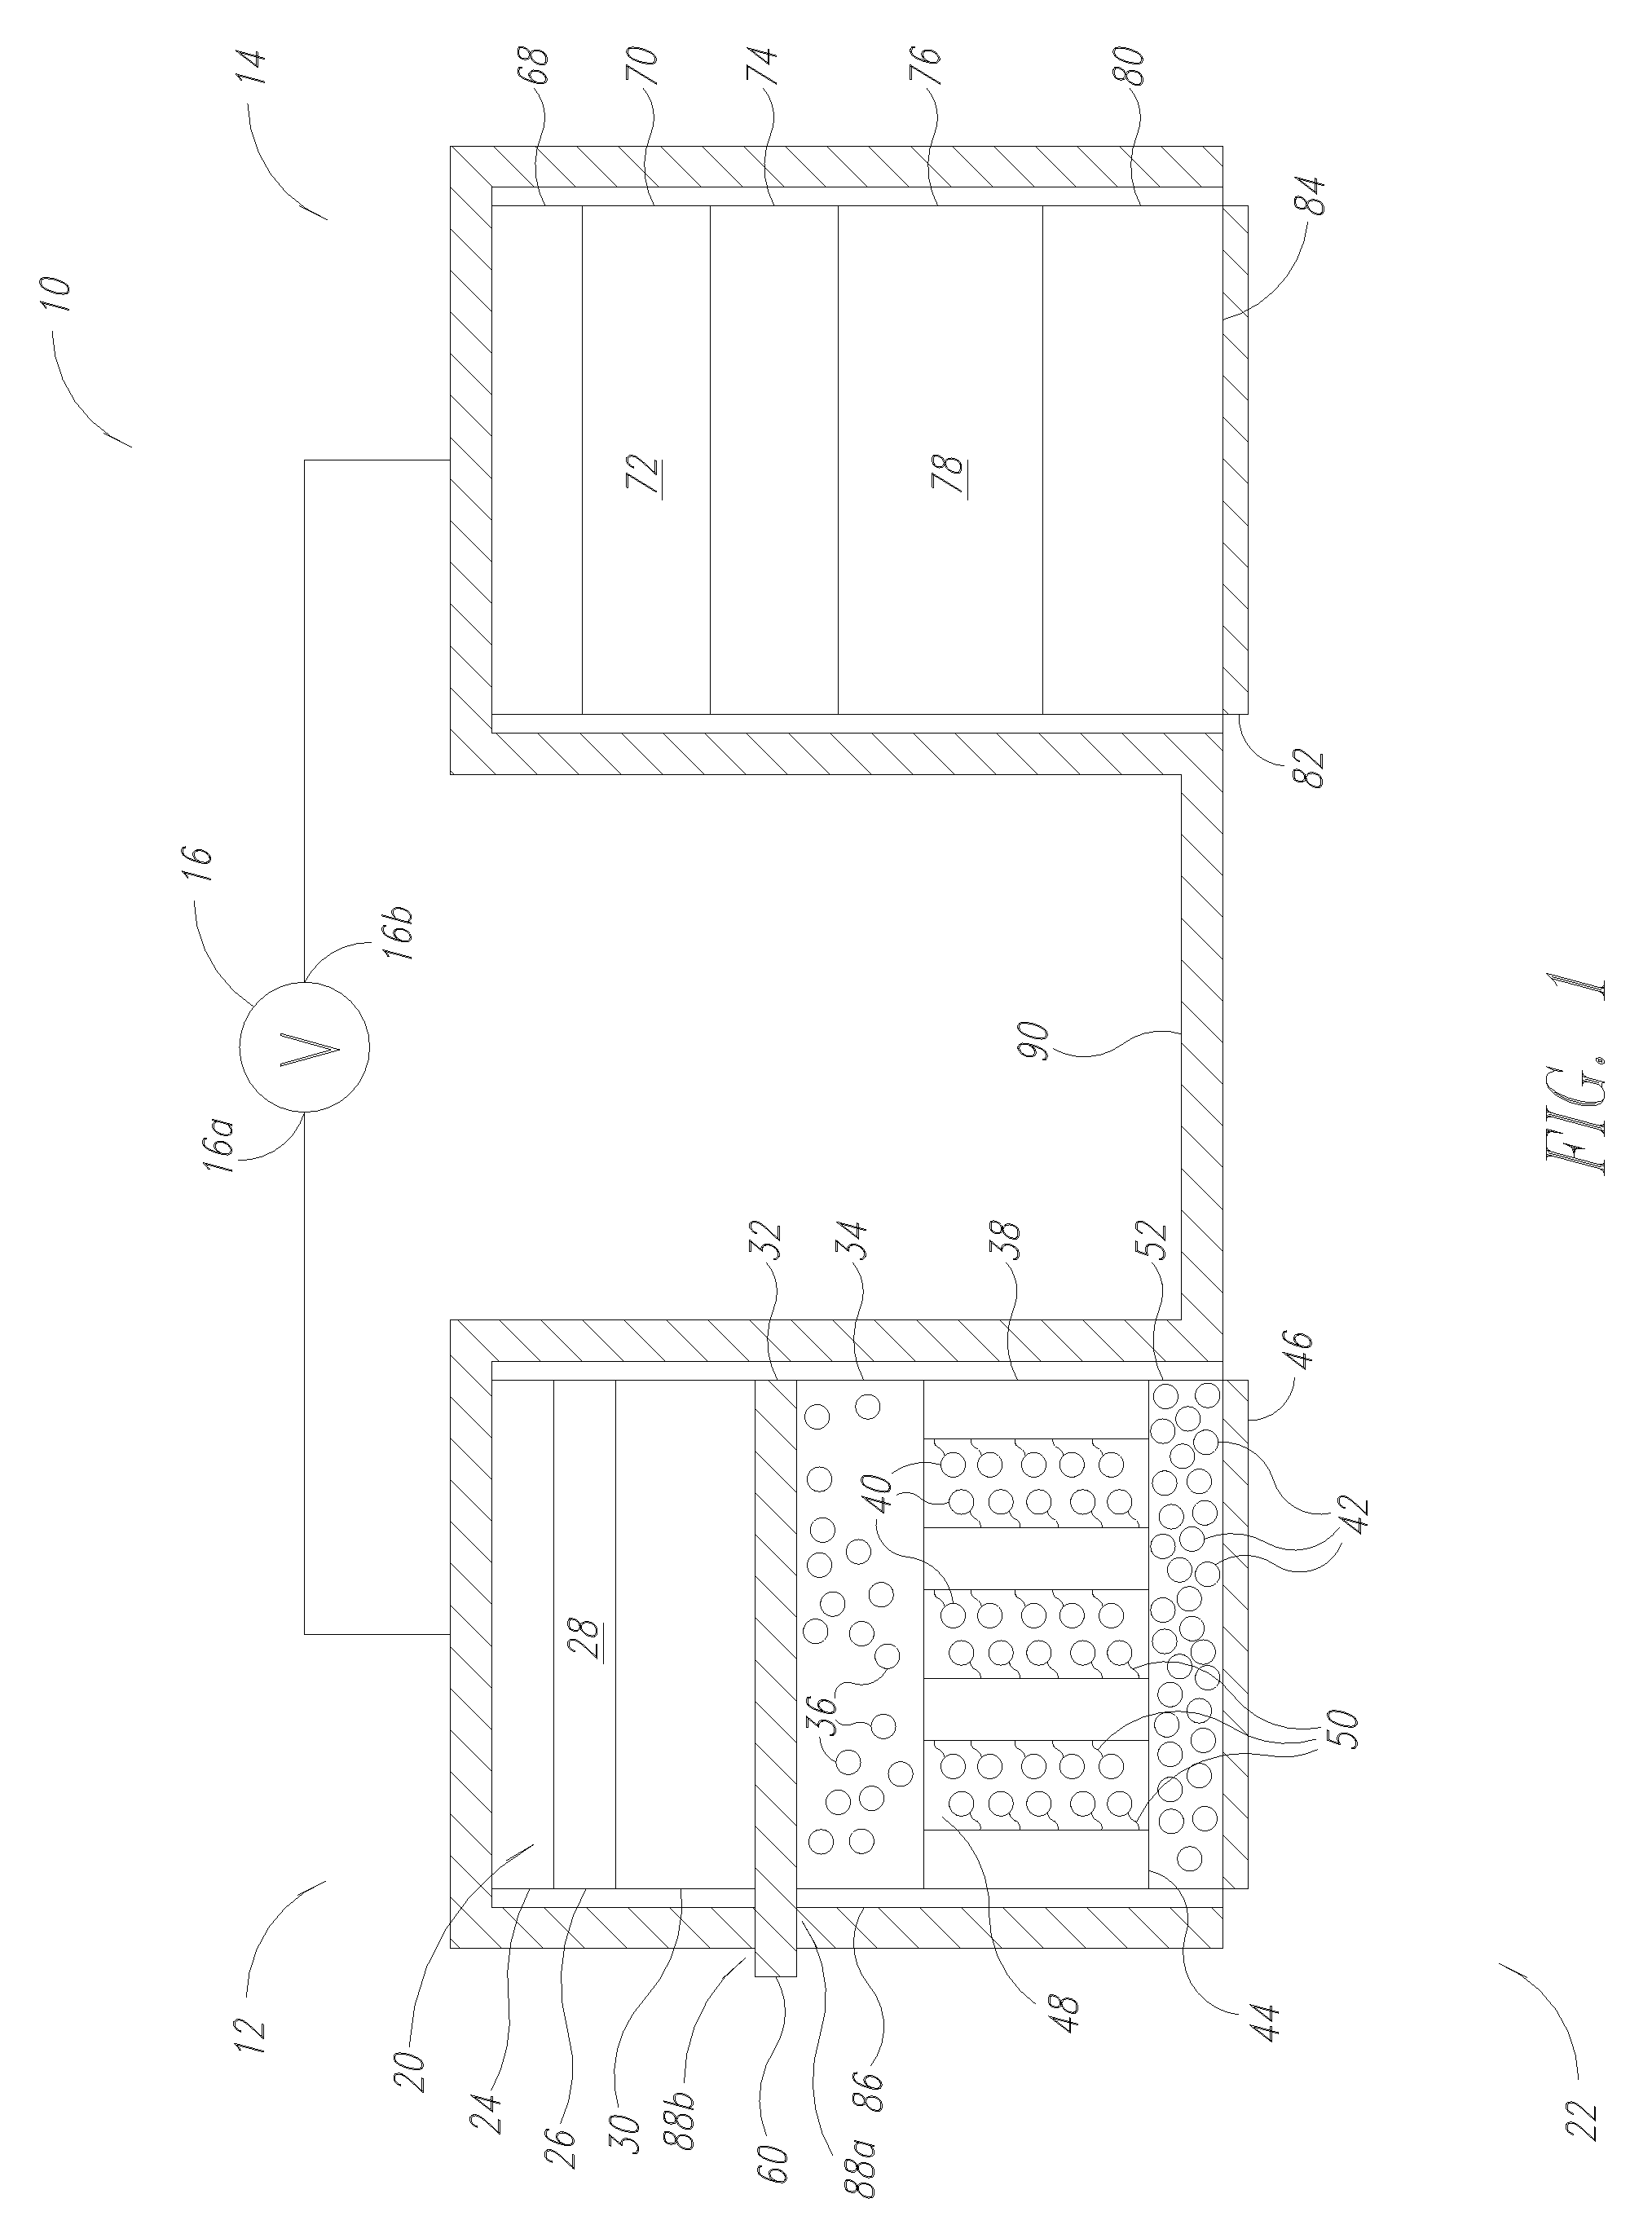 Iontophoresis apparatus and method to deliver active agents to biological interfaces